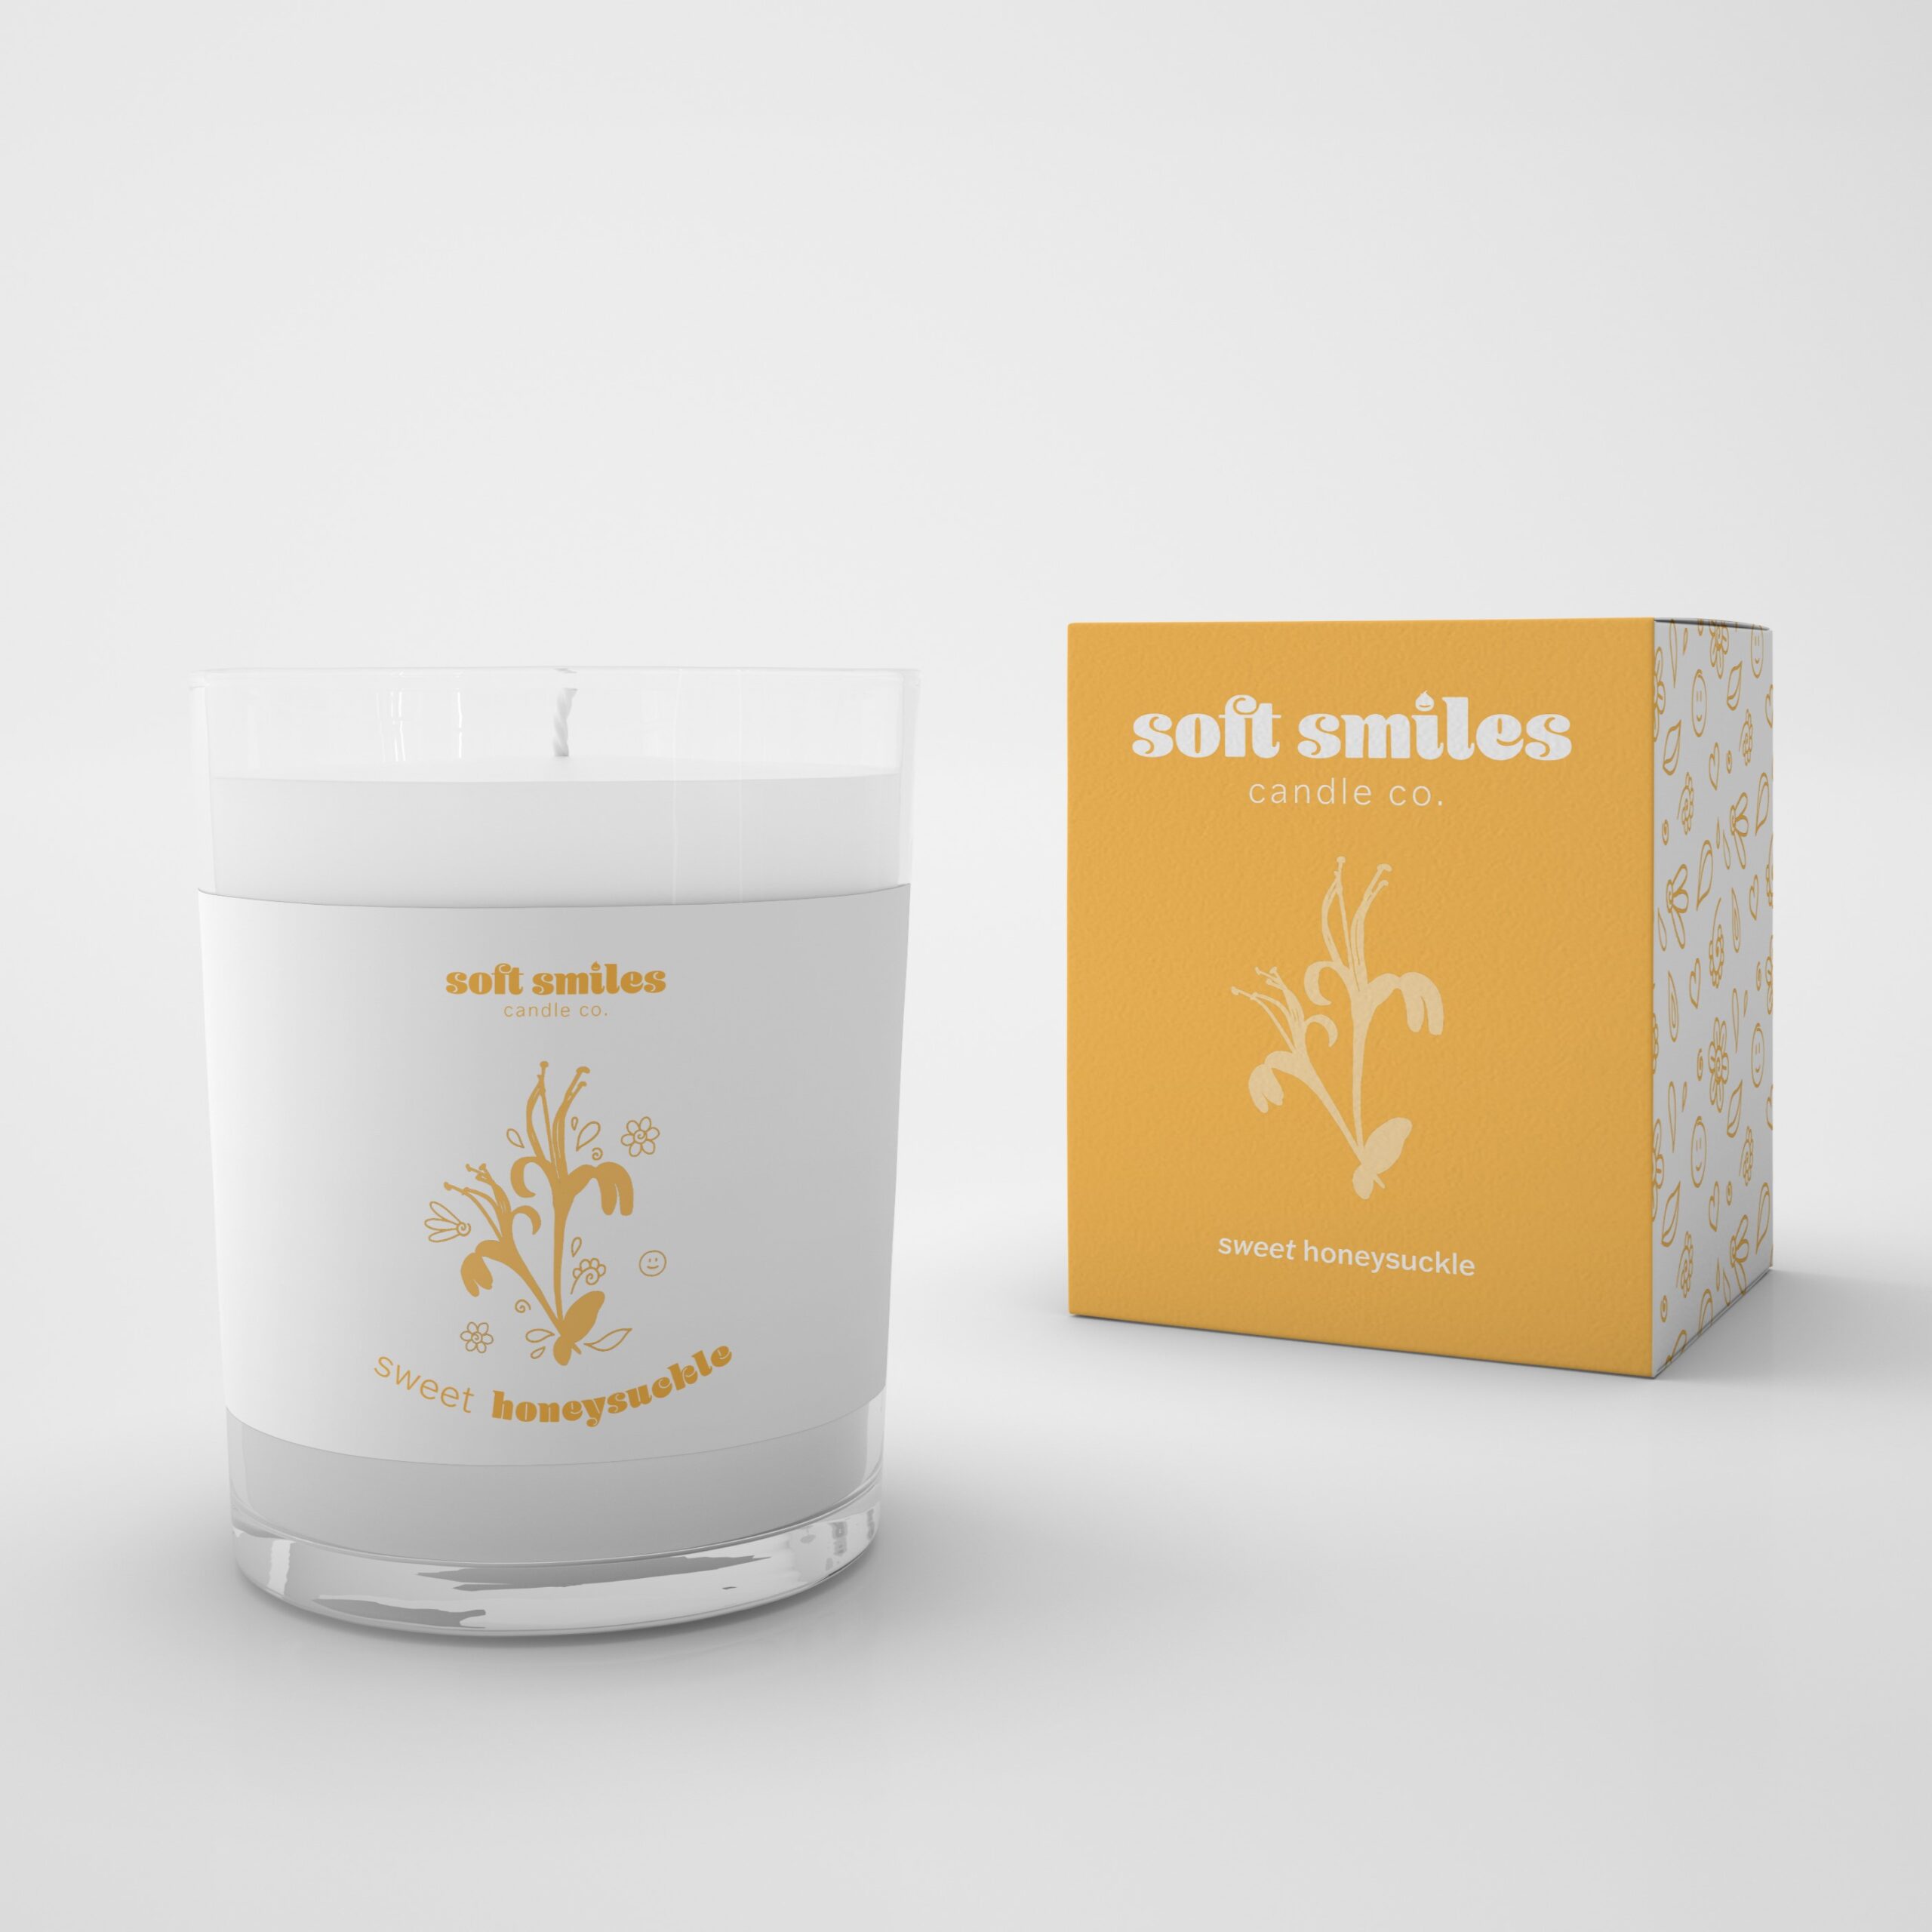 Mock up of a Soft Smiles brand candle and box packaging on a white background. The candle scent is sweet honeysuckle and the color palette is yellow and white